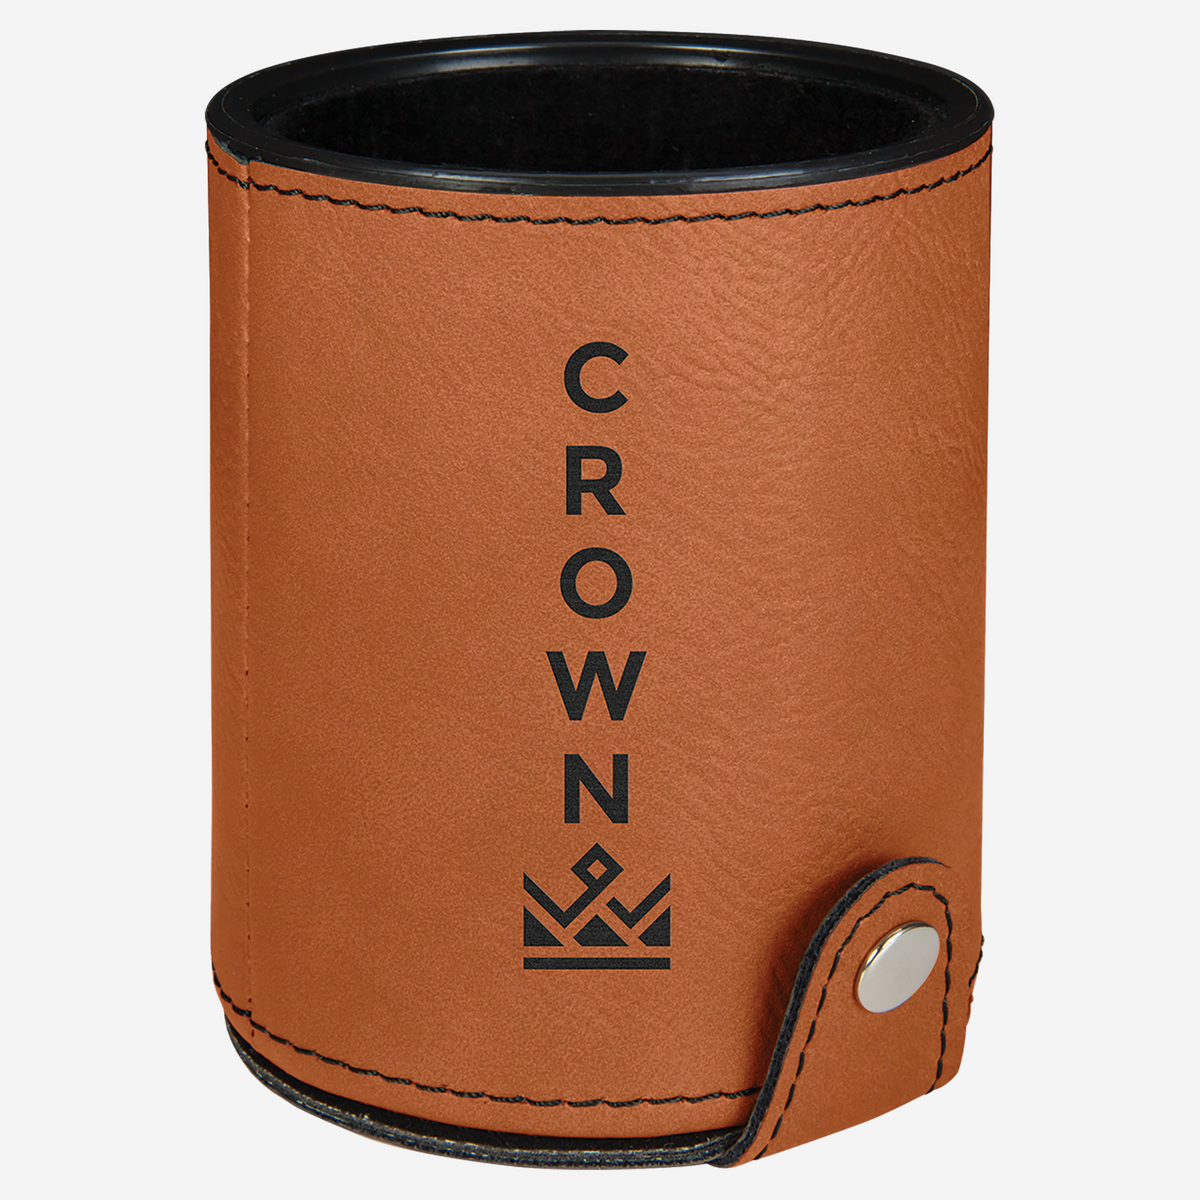 White Smoke Leatherette Dice Cup with Storage